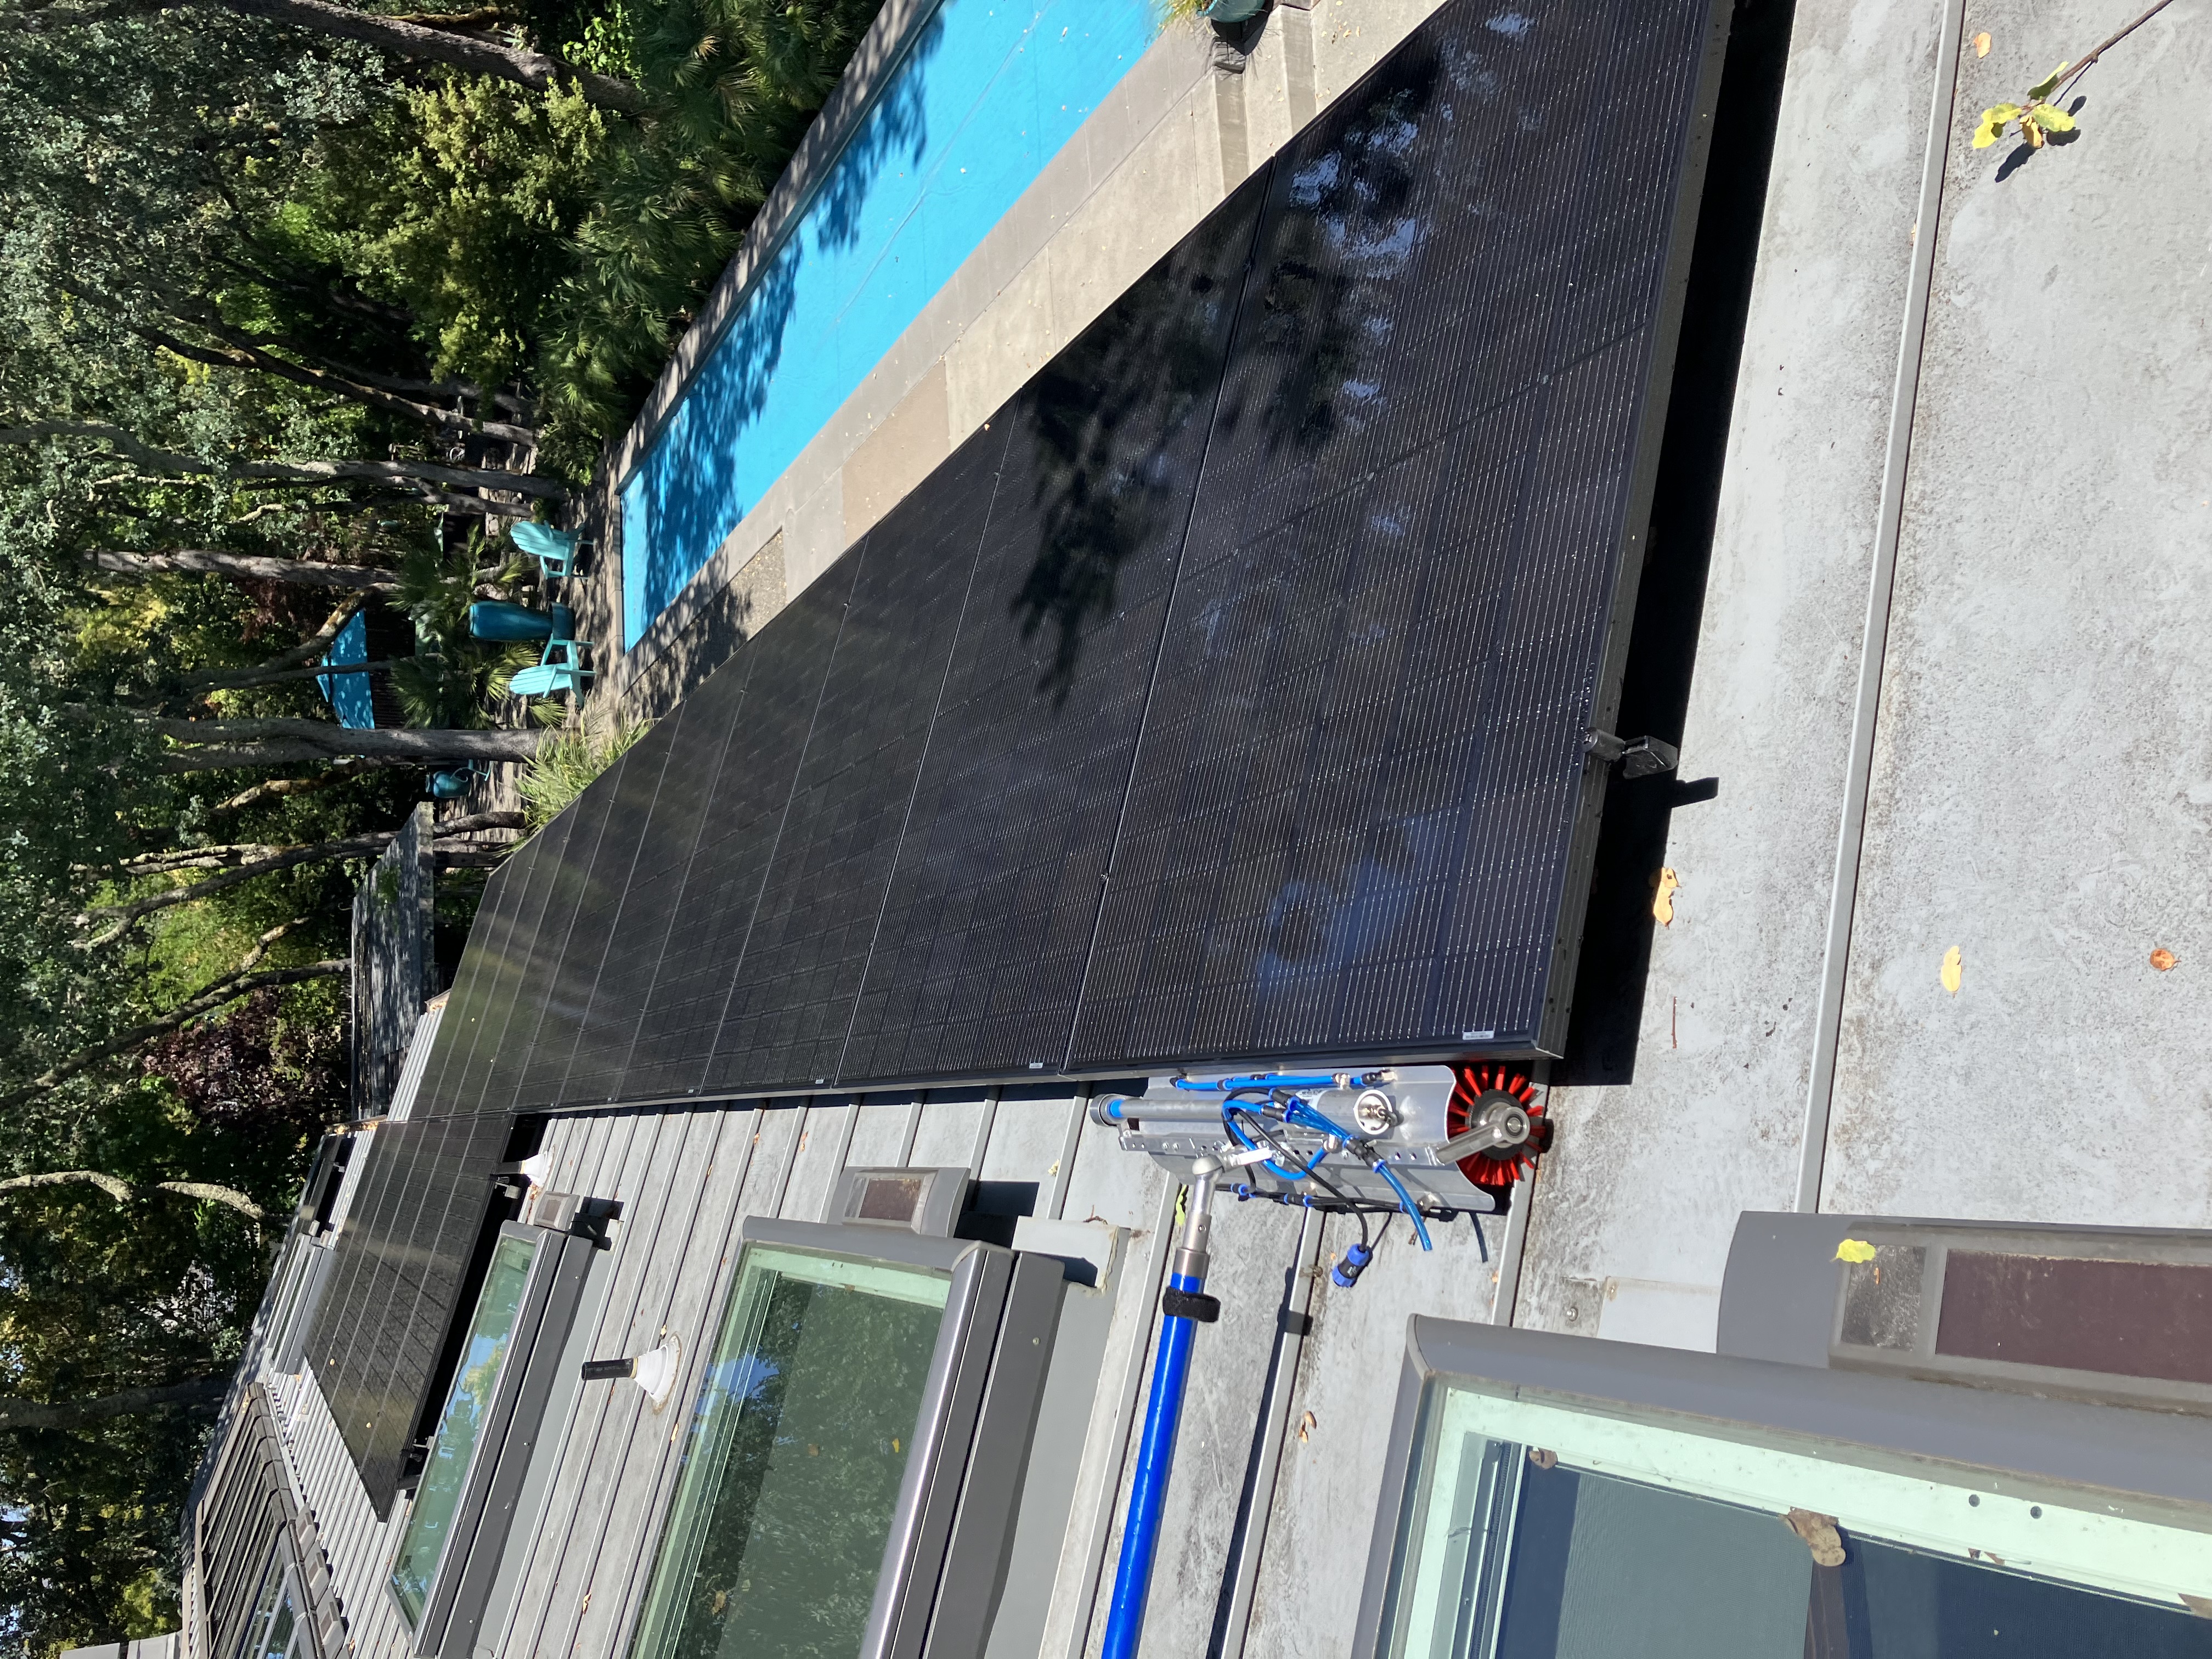 Another High Quality Solar Panel Cleaning Performed in Glen Ellen, Ca.